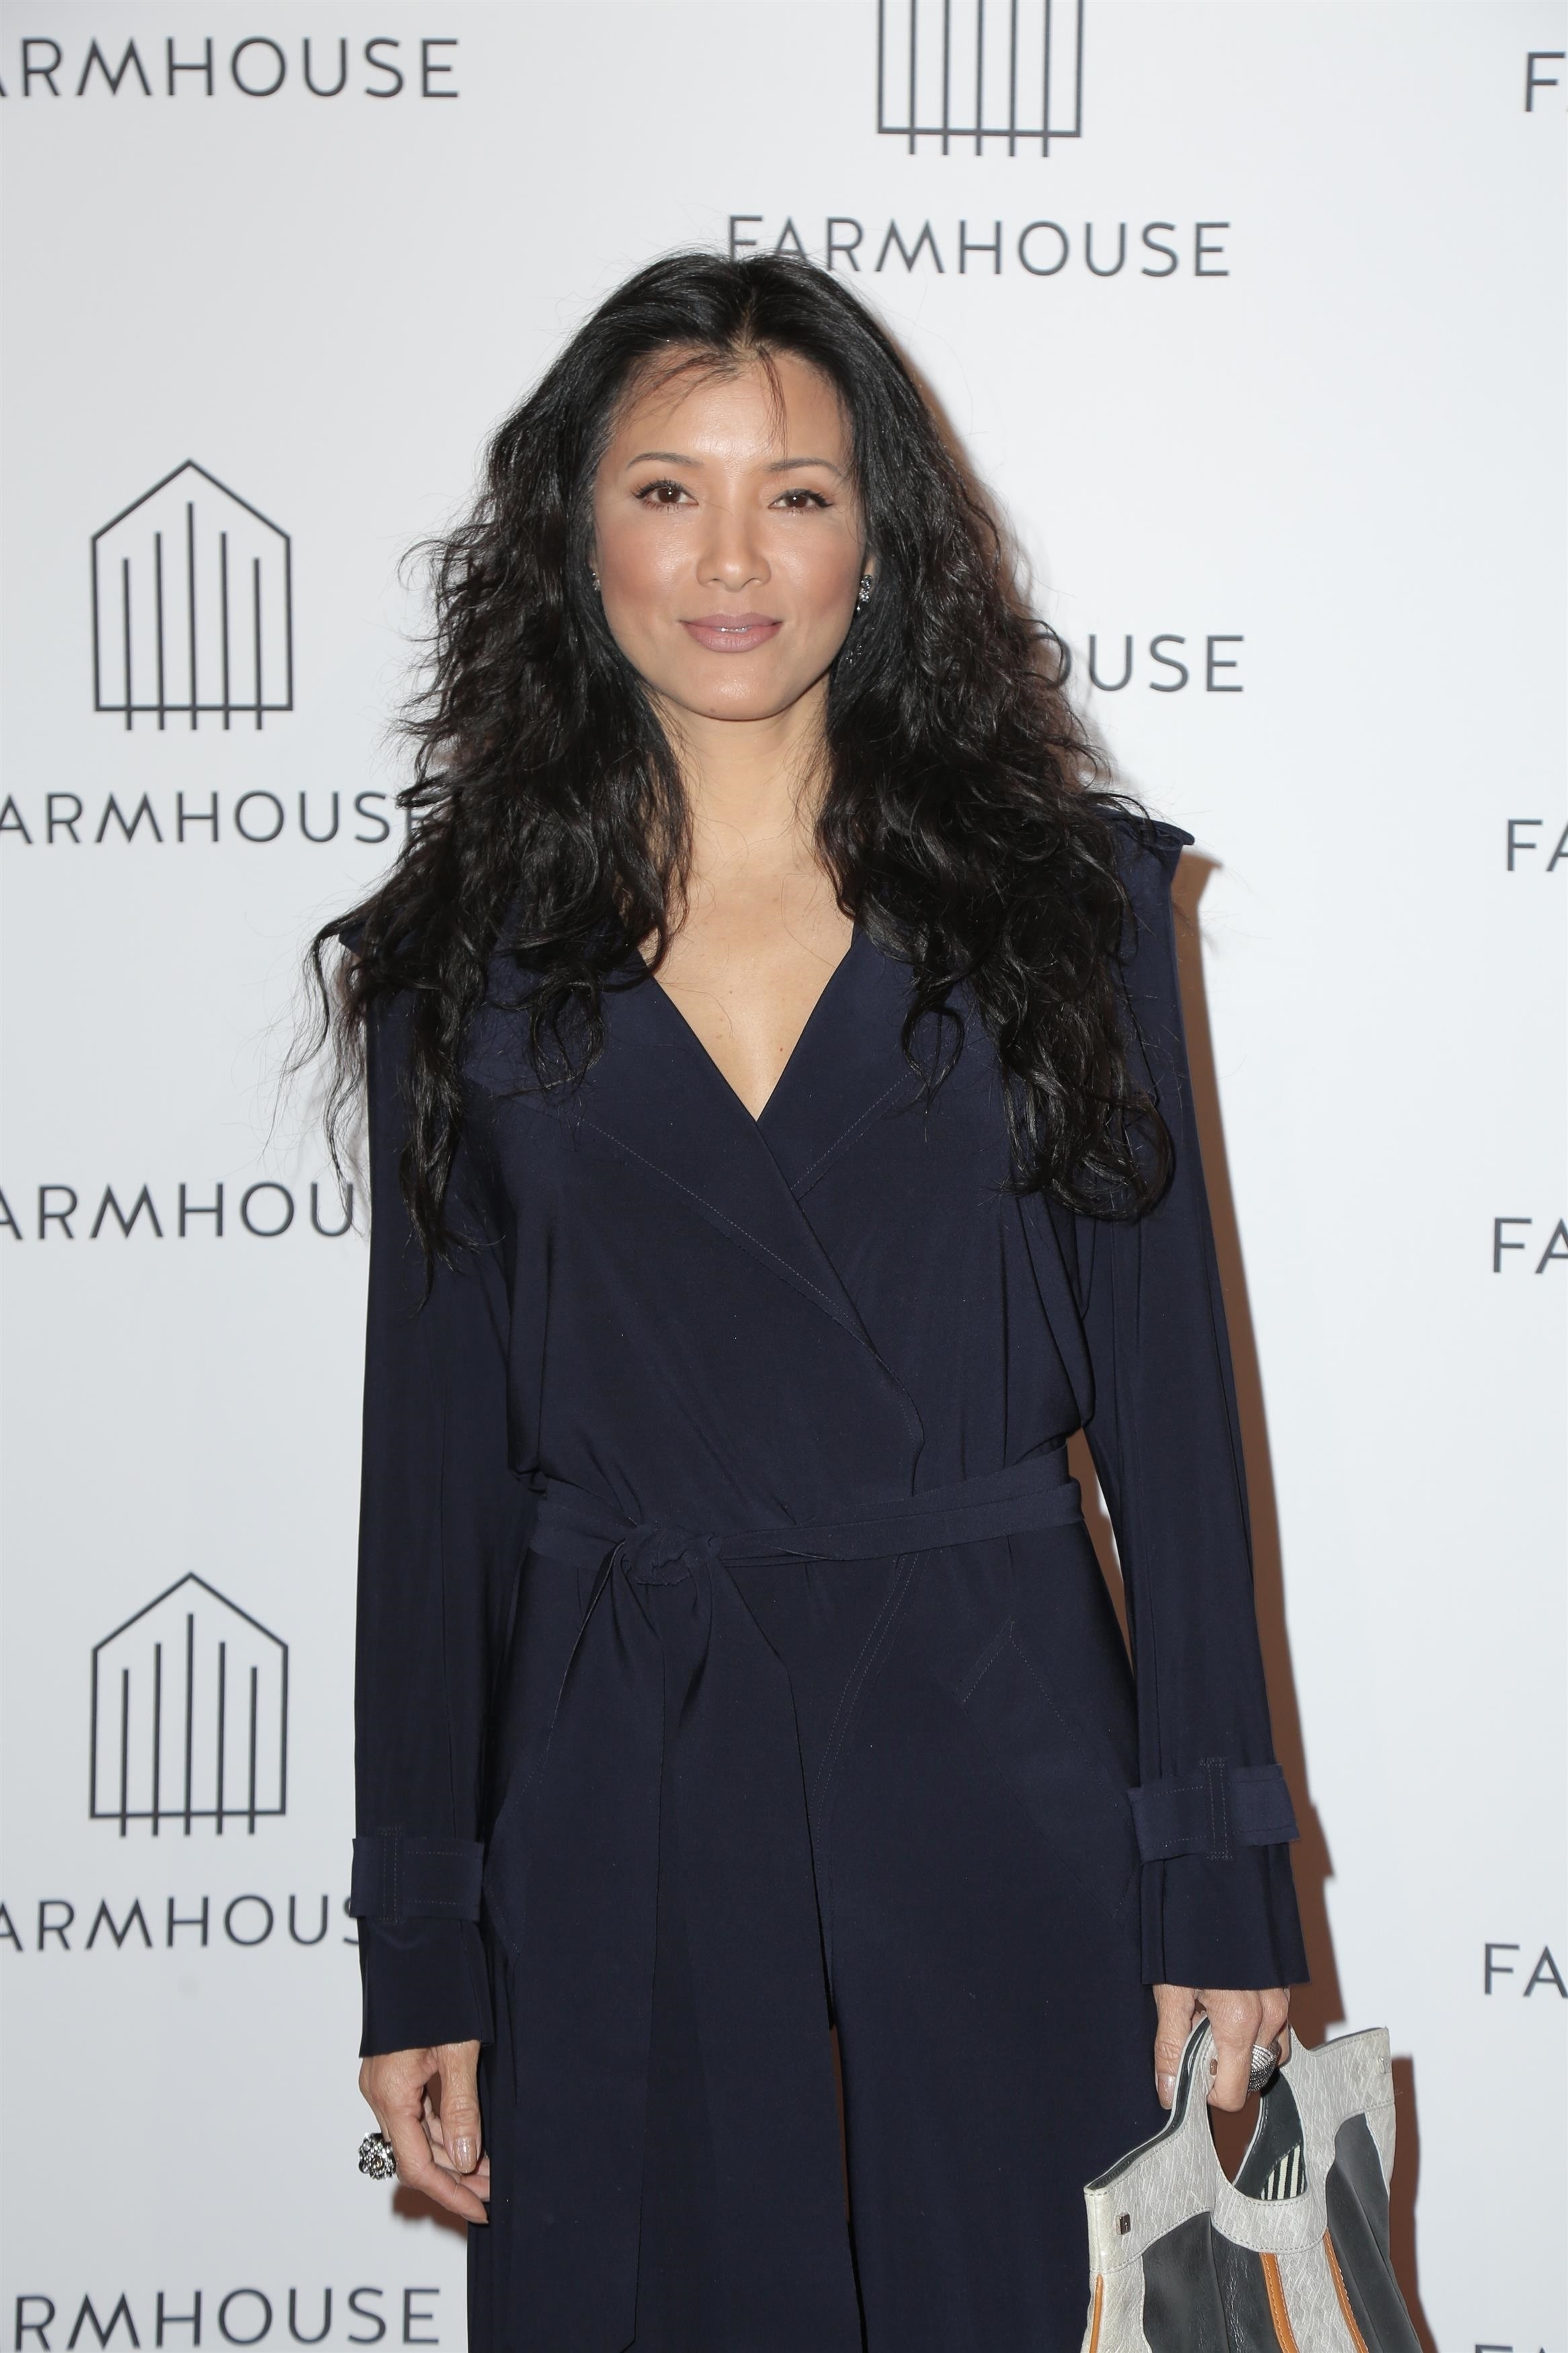 kelly-hu-grand-opening-of-farmhouse-held-at-the-beverly-center-31518-4.jpg